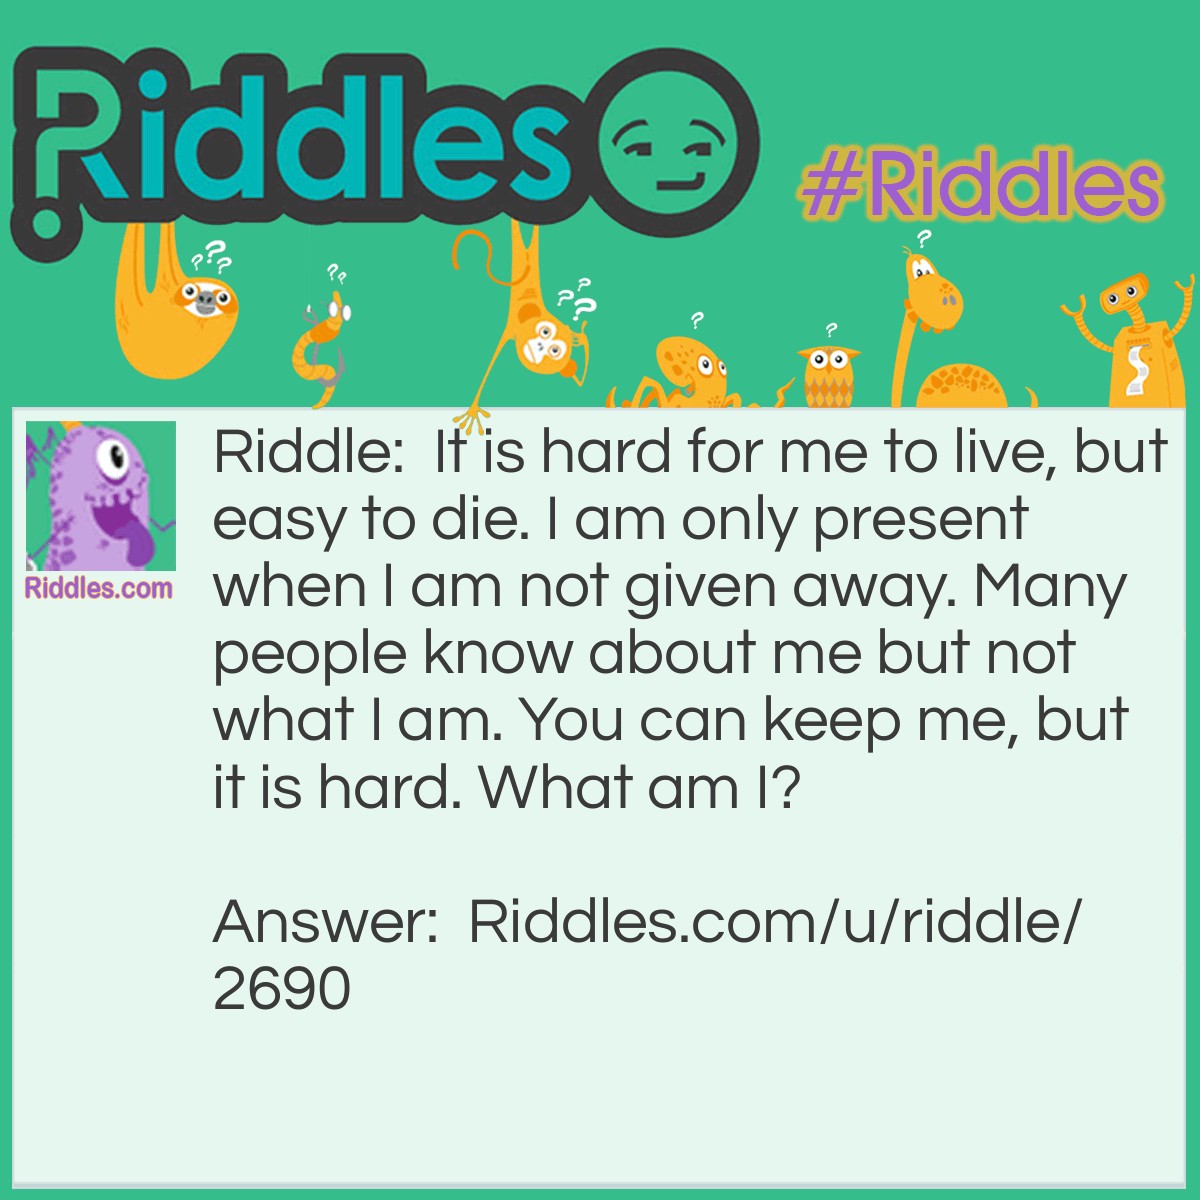 Riddle: It is hard for me to live, but easy to die. I am only present when I am not given away. Many people know about me but not what I am. You can keep me, but it is hard. What am I? Answer: A secret.